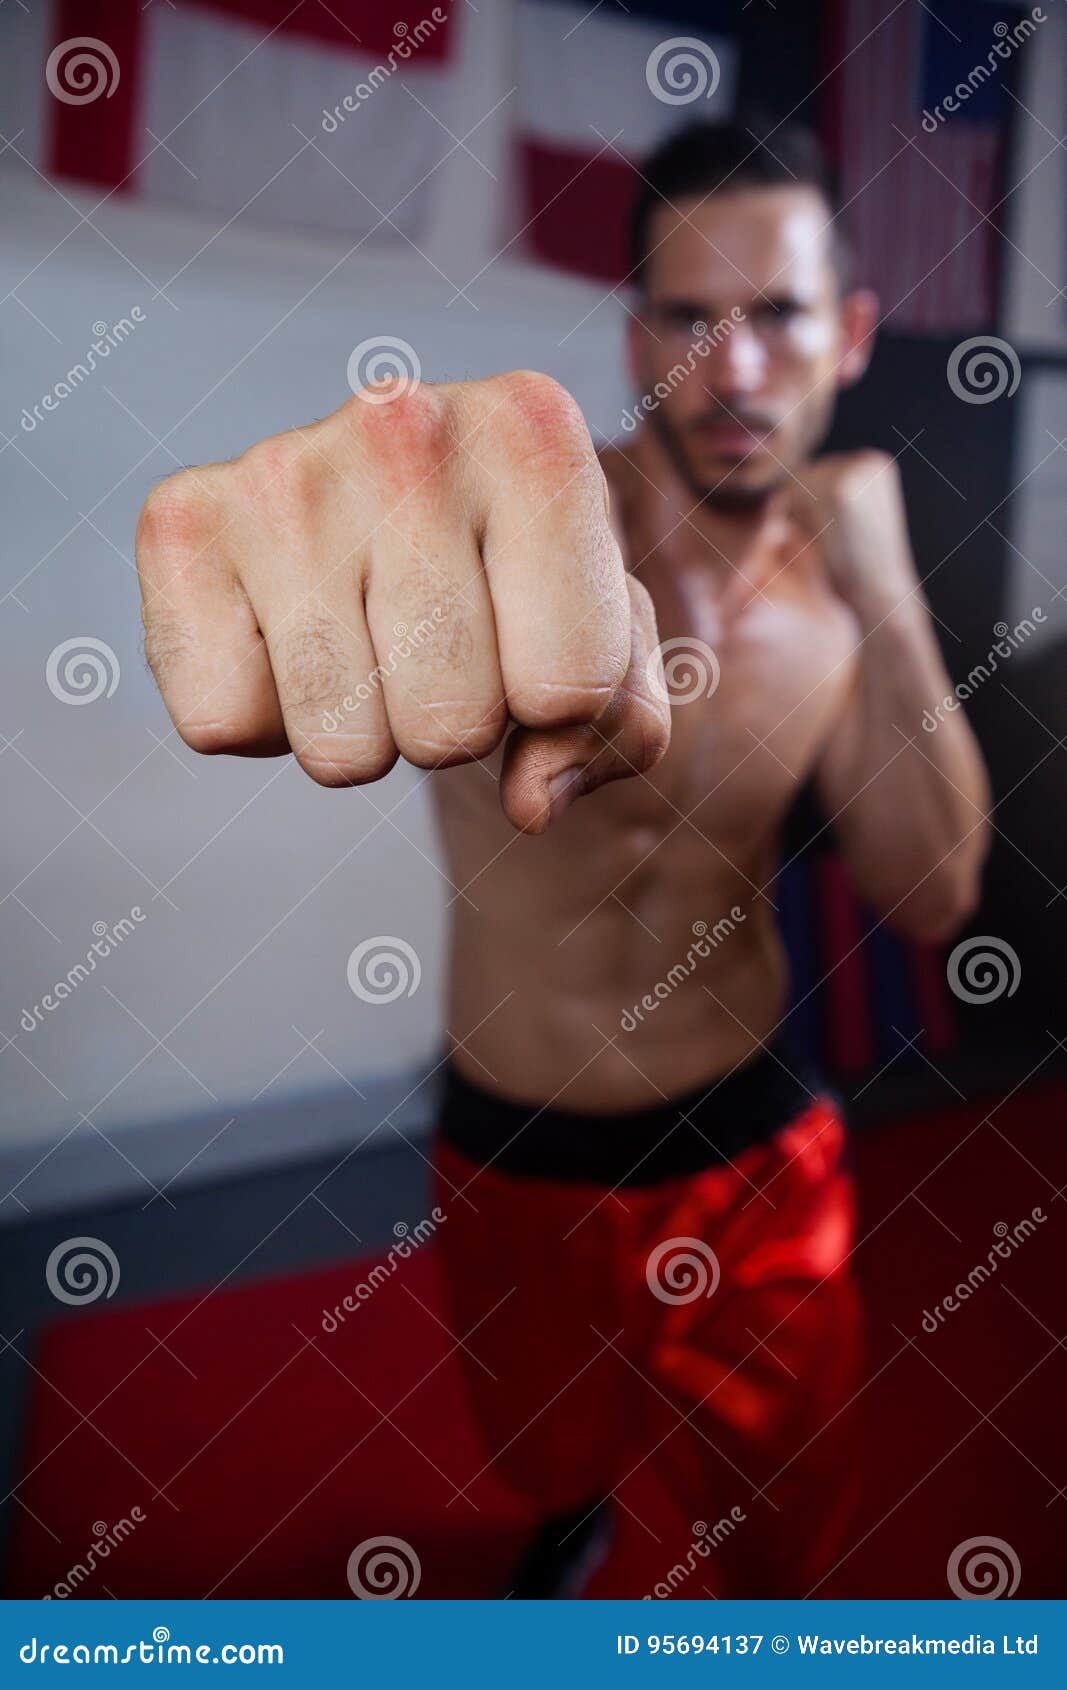 Man Practicing Boxing in Fitness Studio Stock Image - Image of club ...